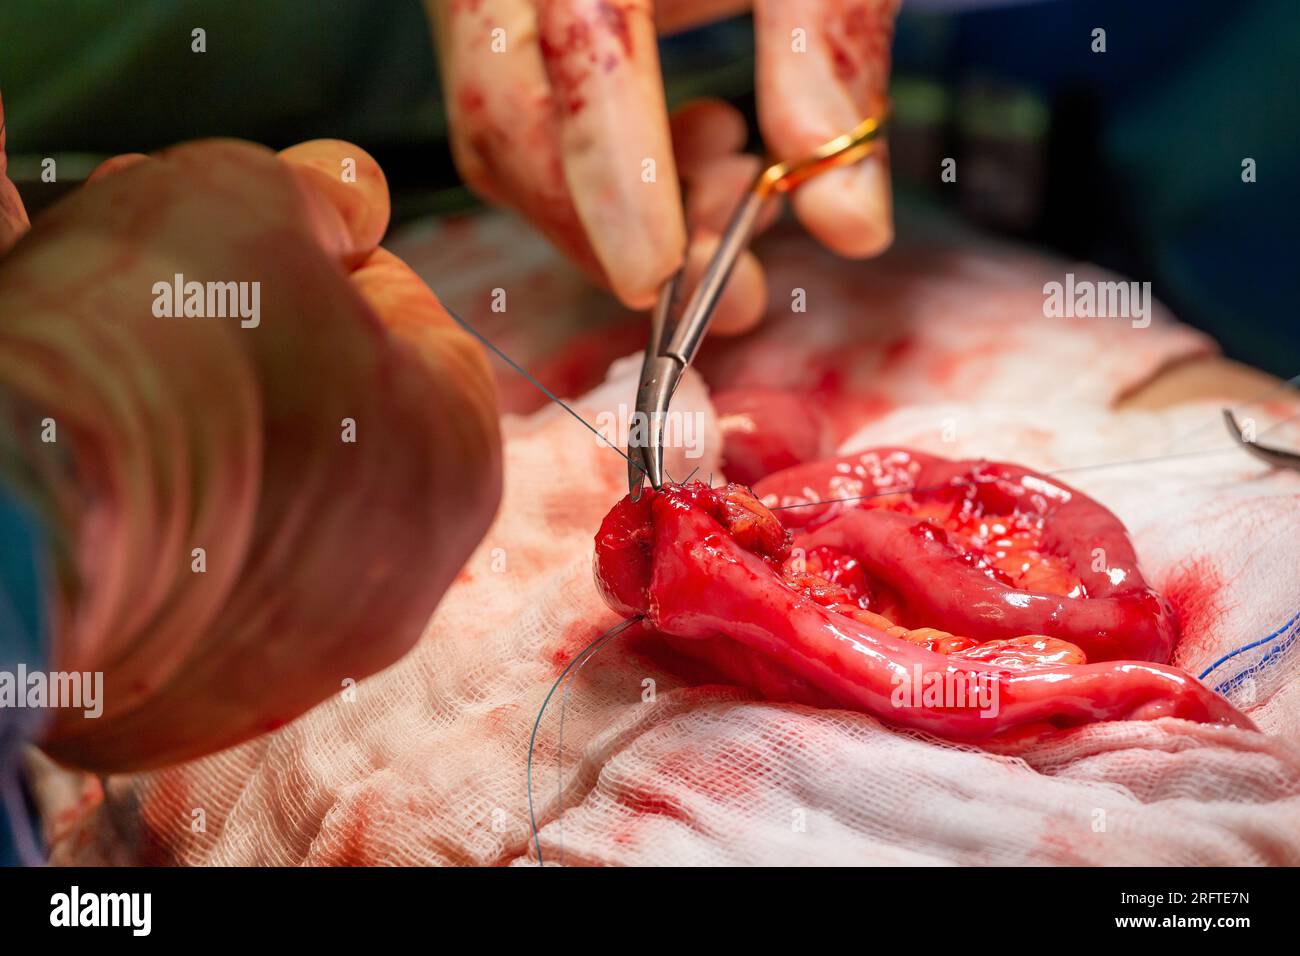 Surgical operation, closeup on operating field and hands of surgeons. Stock Photo